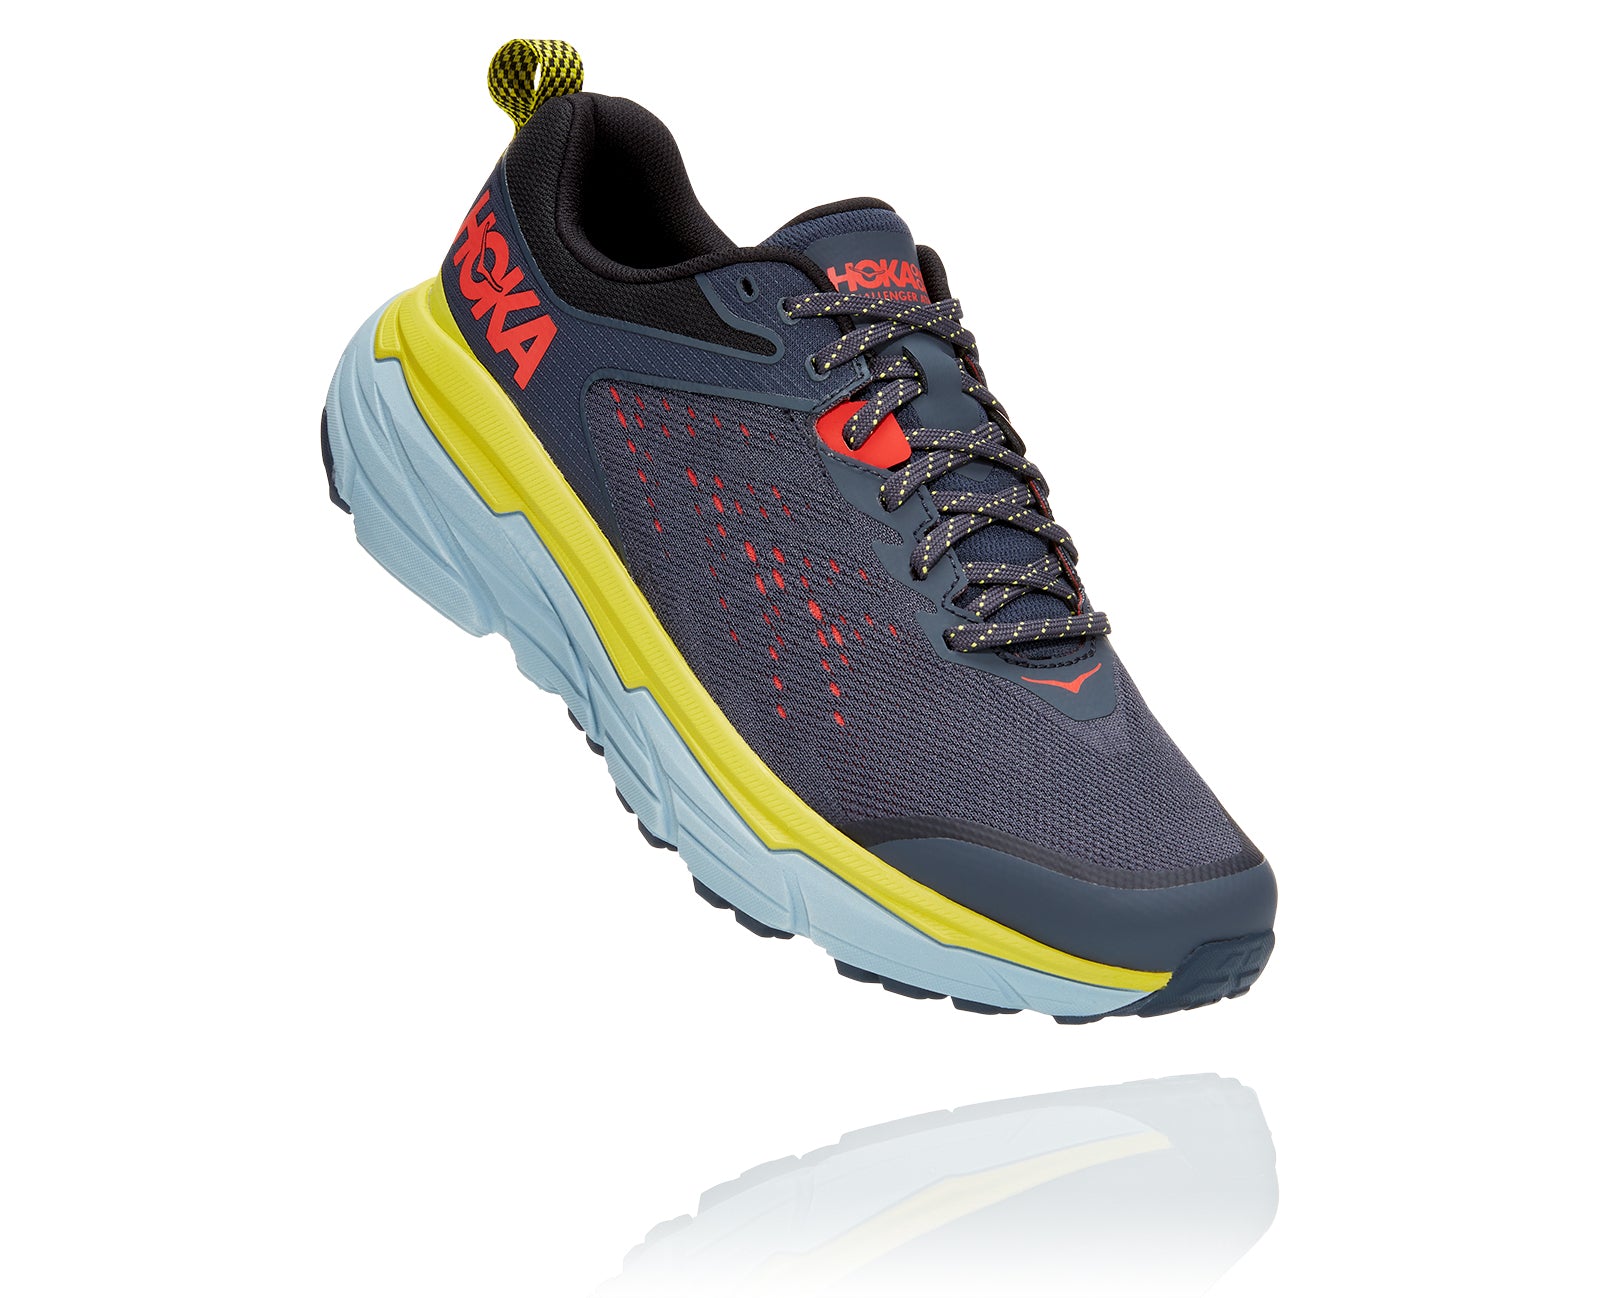 In its sixth iteration, the Men's Hoka Challenger 6 continues its reputation for versatility. As its name suggests, this all-terrain shoe does it all — performing light on the trail and smooth on the street, thanks to its midsole shape and outsole construction. Purposefully designed for versatile traction, its distinctive outsole has zonal construction to optimize grip and weight. The Challenger ATR 6’s delivers smooth transitions from one surface to another. 